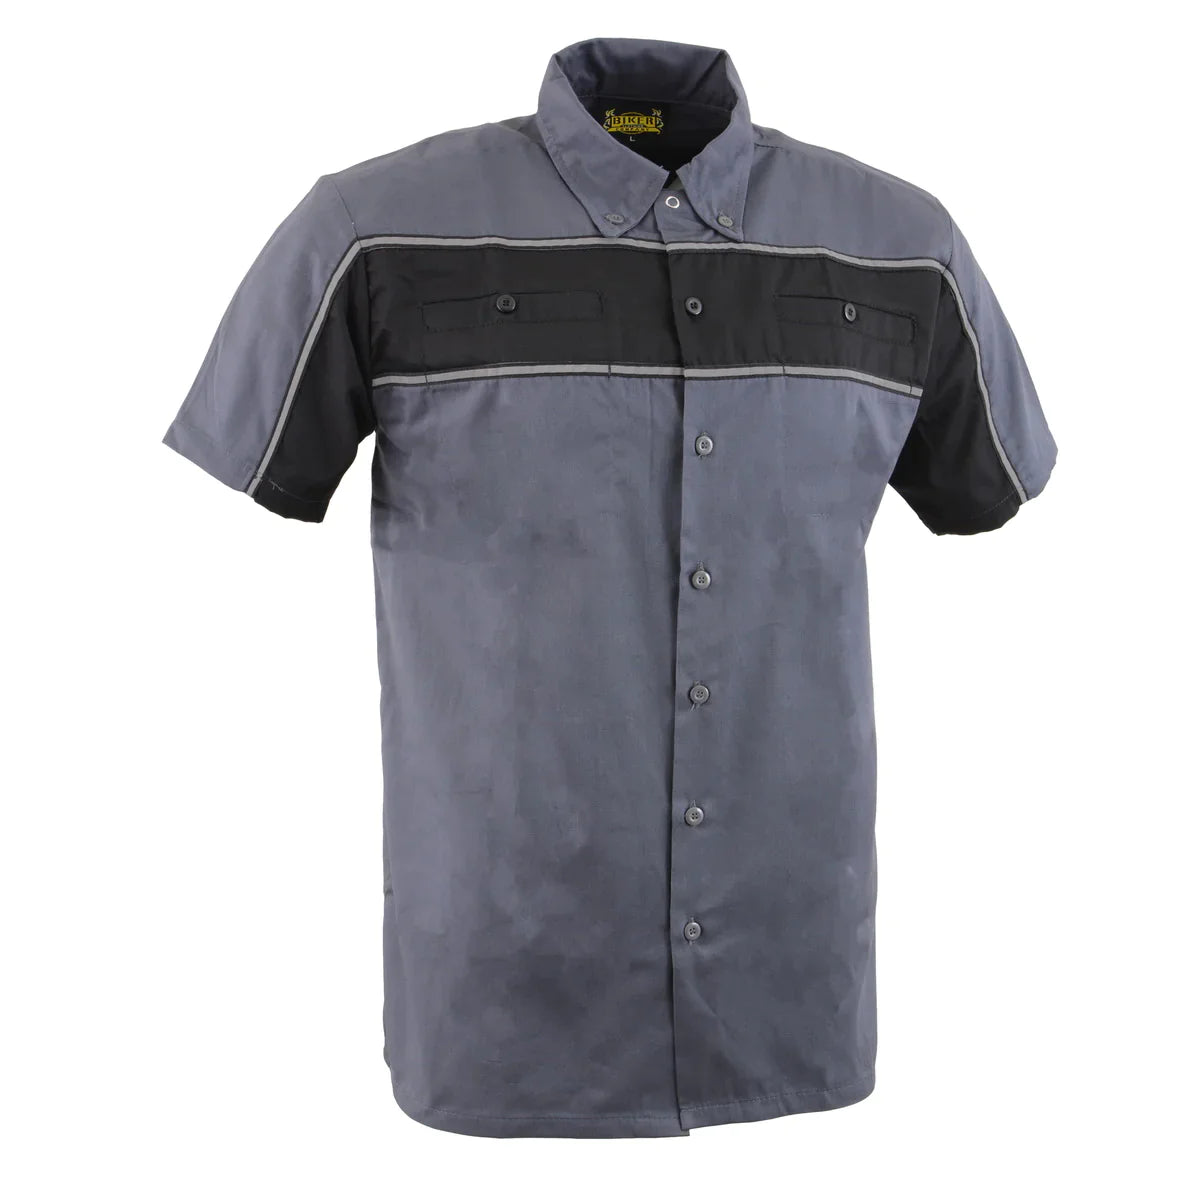 Grey and Black Button Up Heavy-Duty Work Shirt for Men's, Classic Mechanic Work Shirt